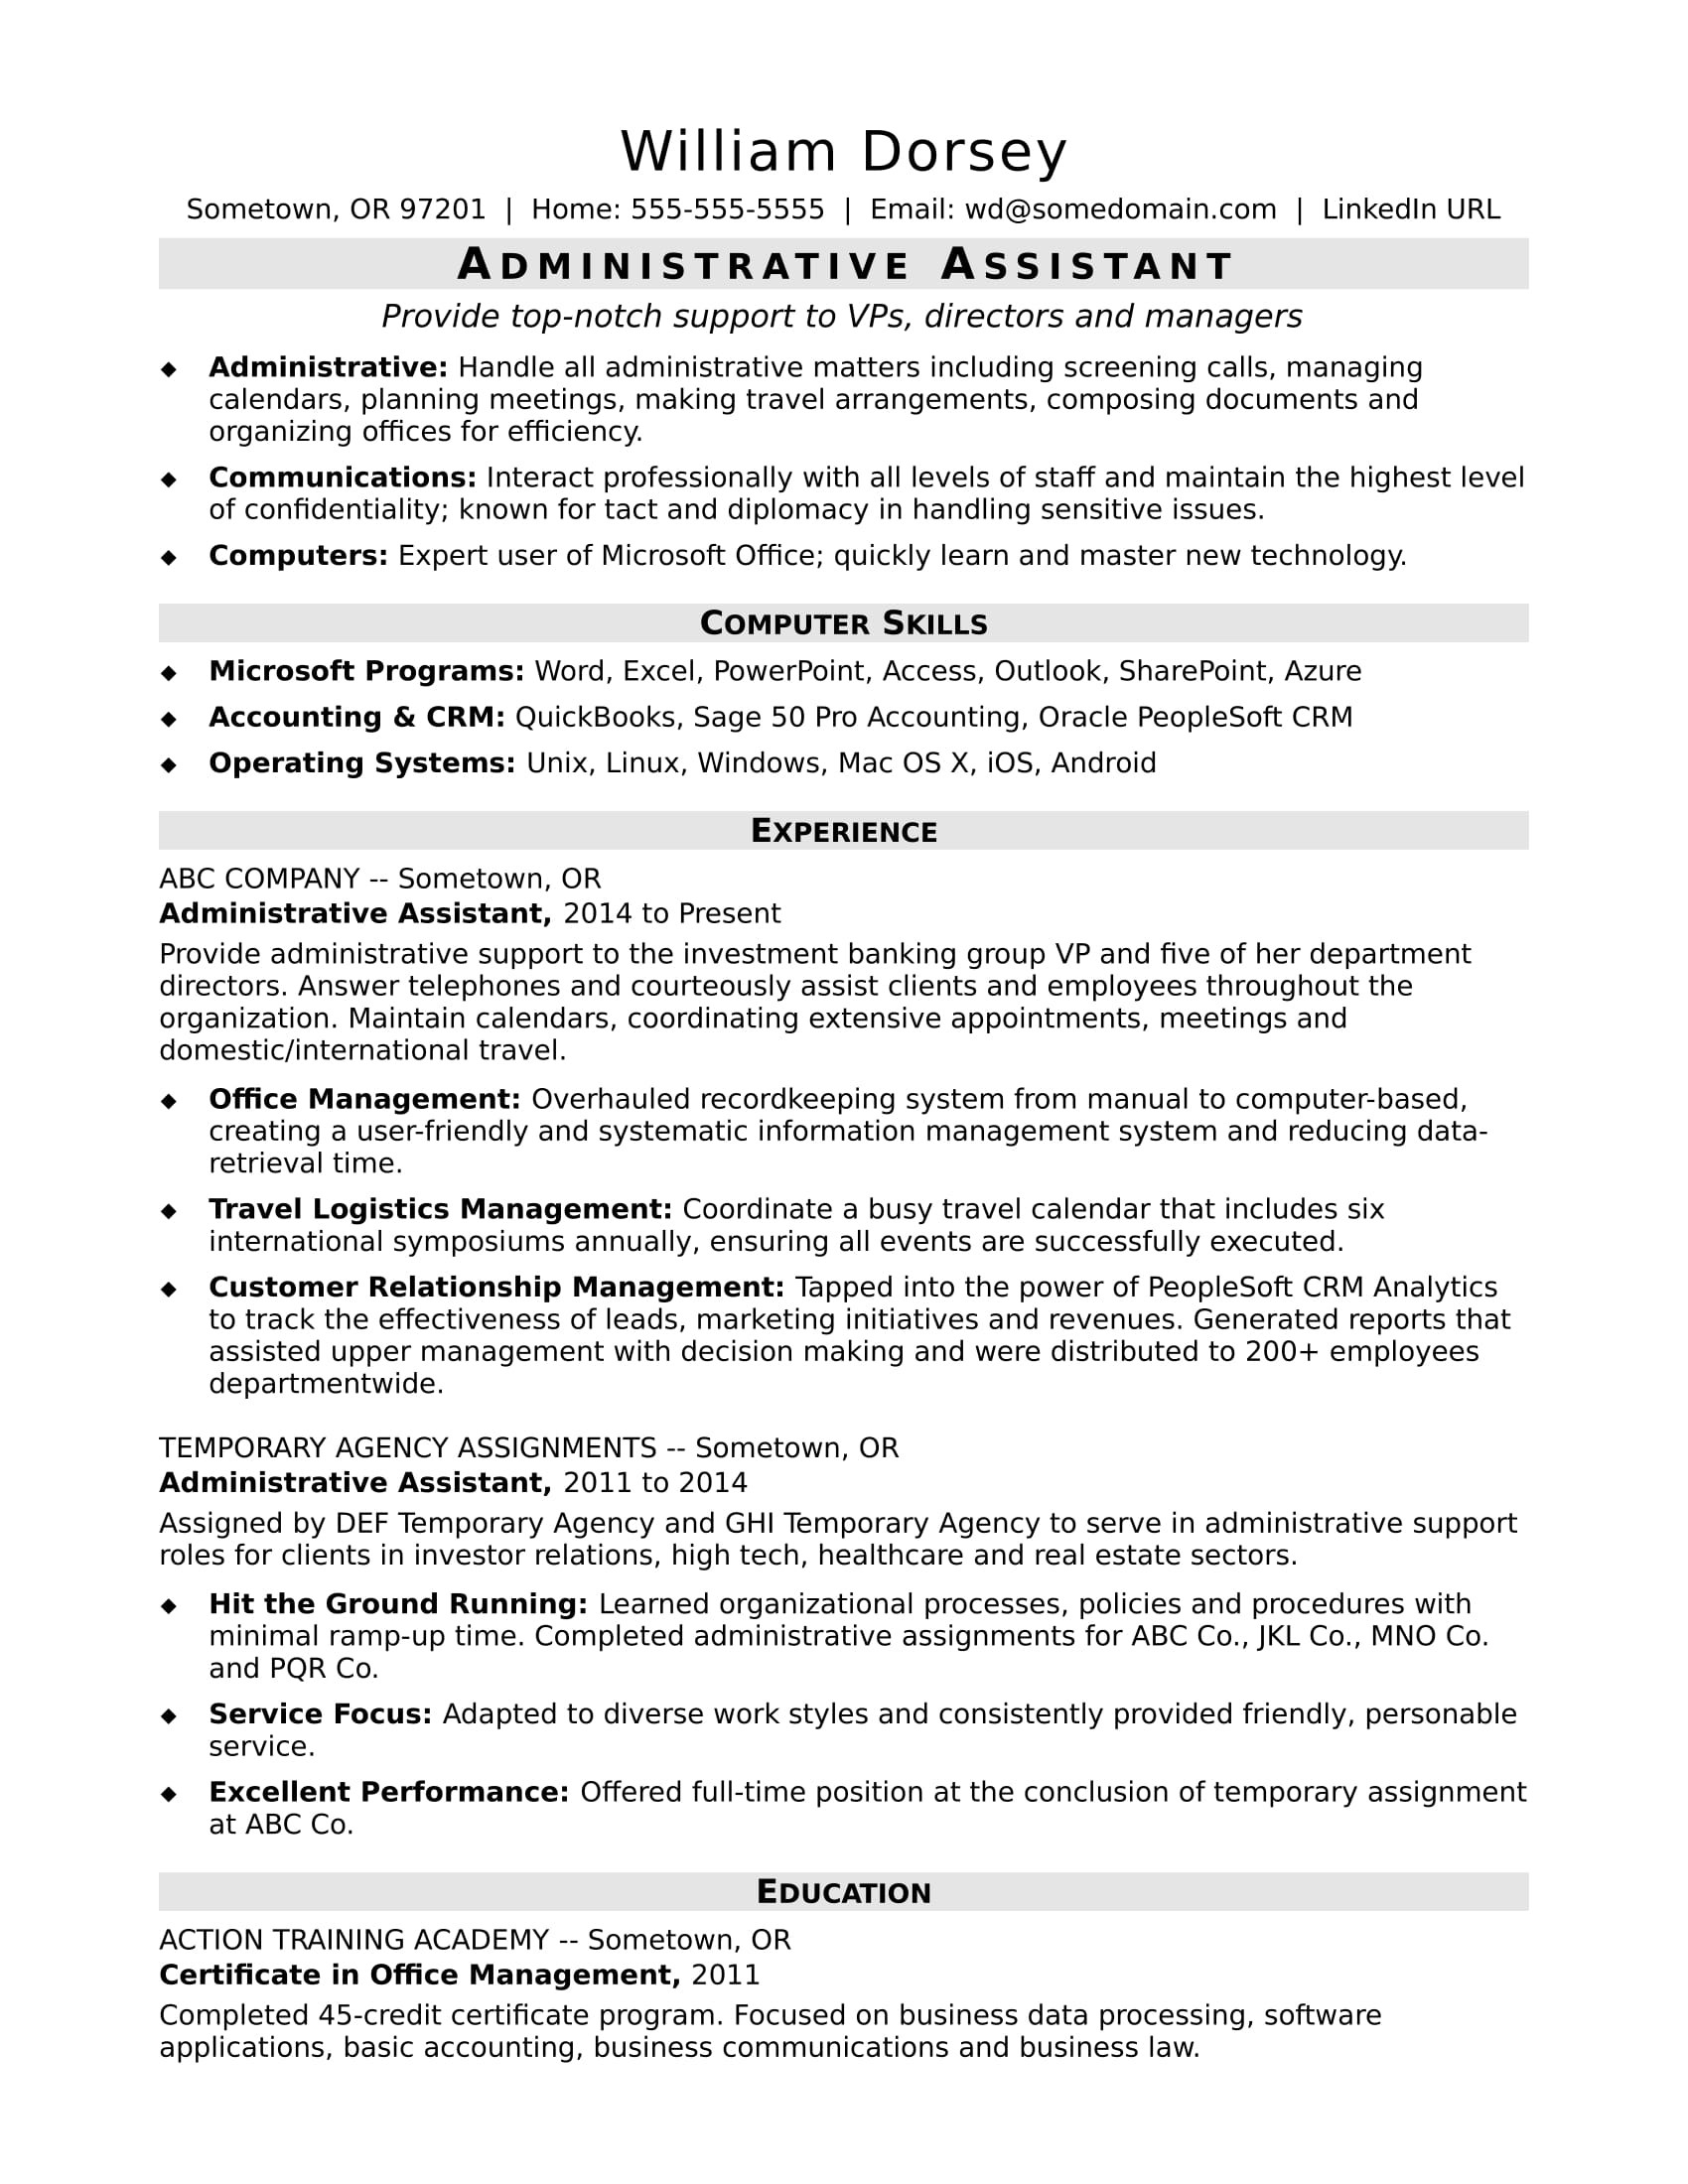 Sample Of Resume with Temporary Jobs Administrative assistant Resume Sample Monster.com